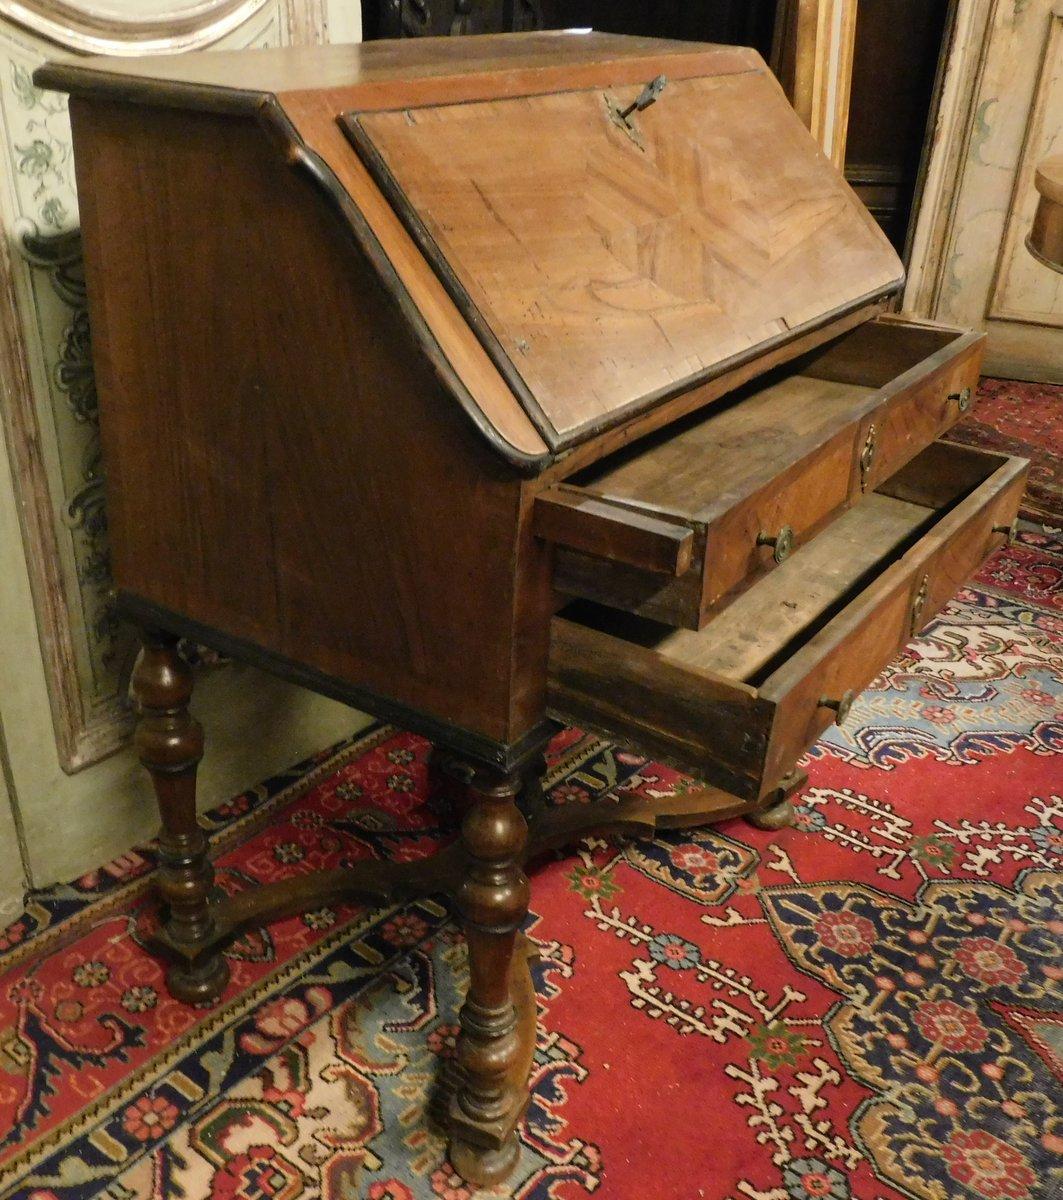 Antique Flap Writing Desk in Walnut, Carved Cross Legs, Early 18th Century Italy For Sale 6